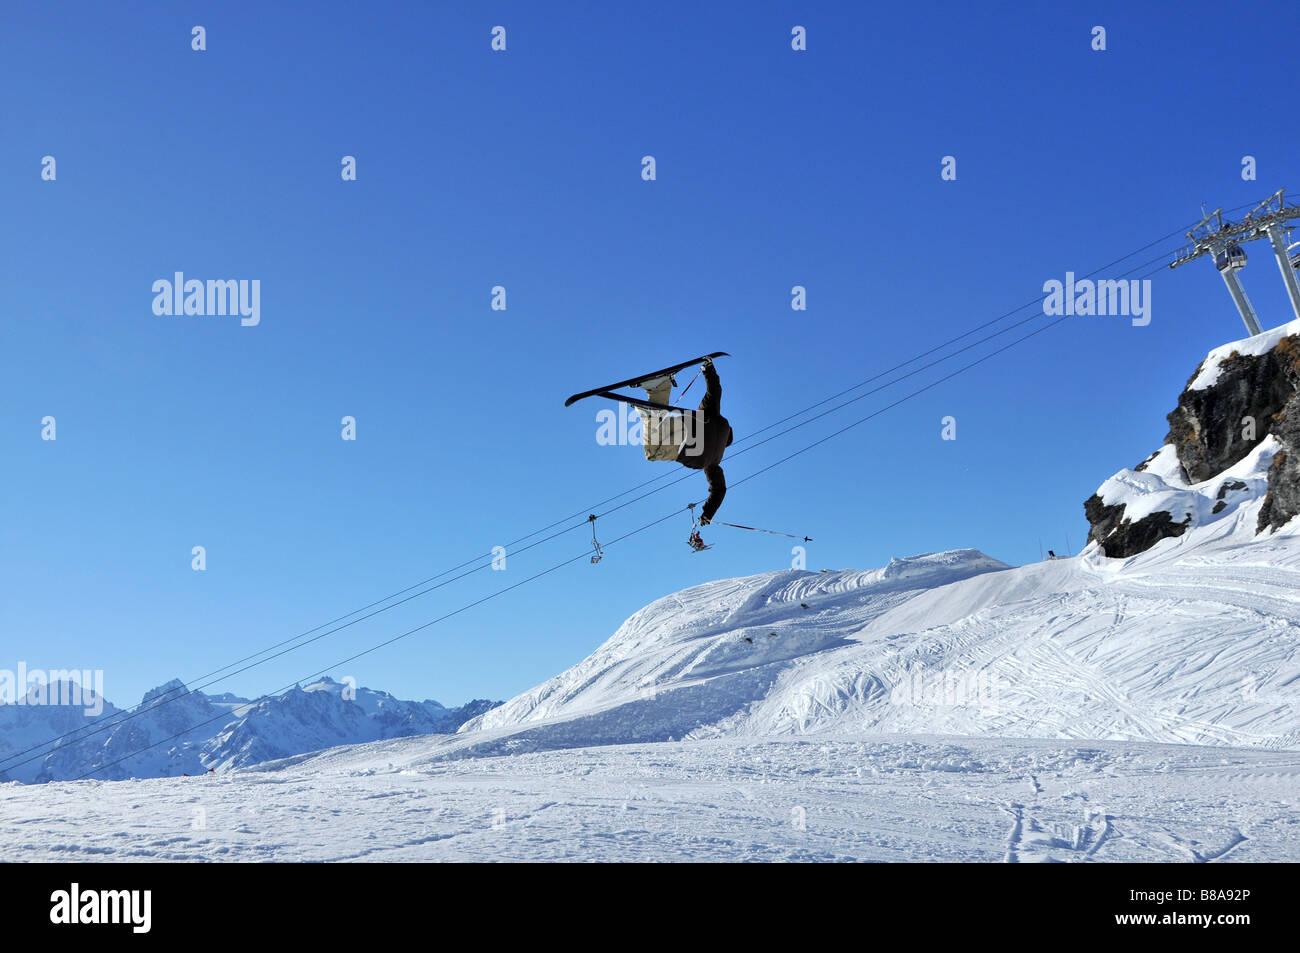 a skier upside down during a jump Stock Photo